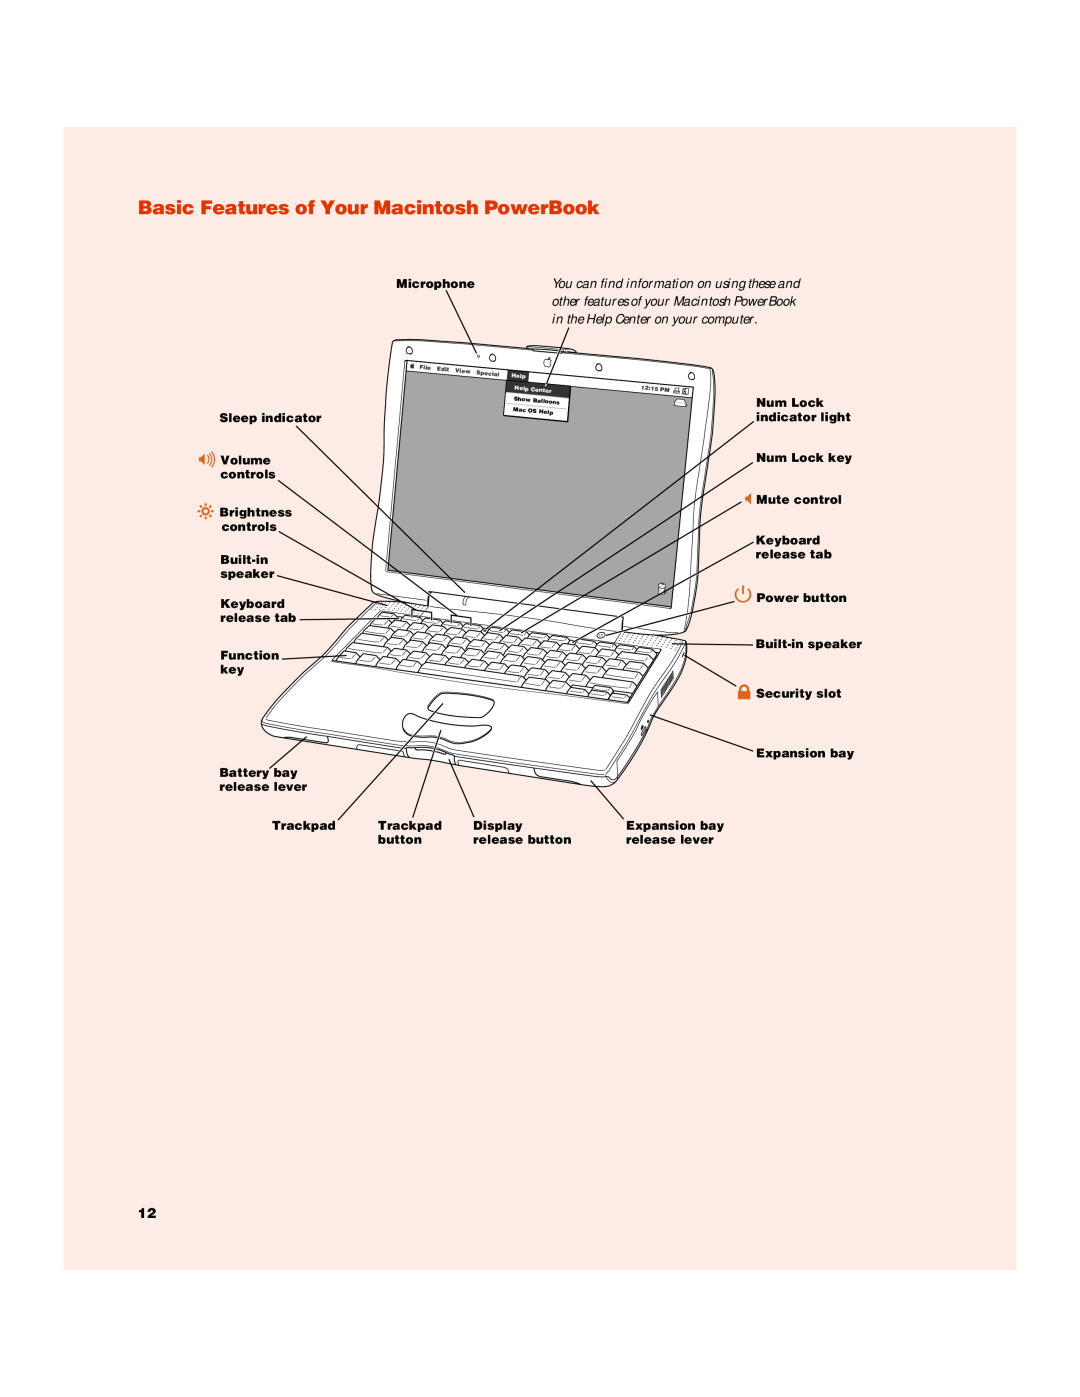 Apple G3 manual Basic Features of Your Macintosh PowerBook, in the Help Center on your computer, Microphone 